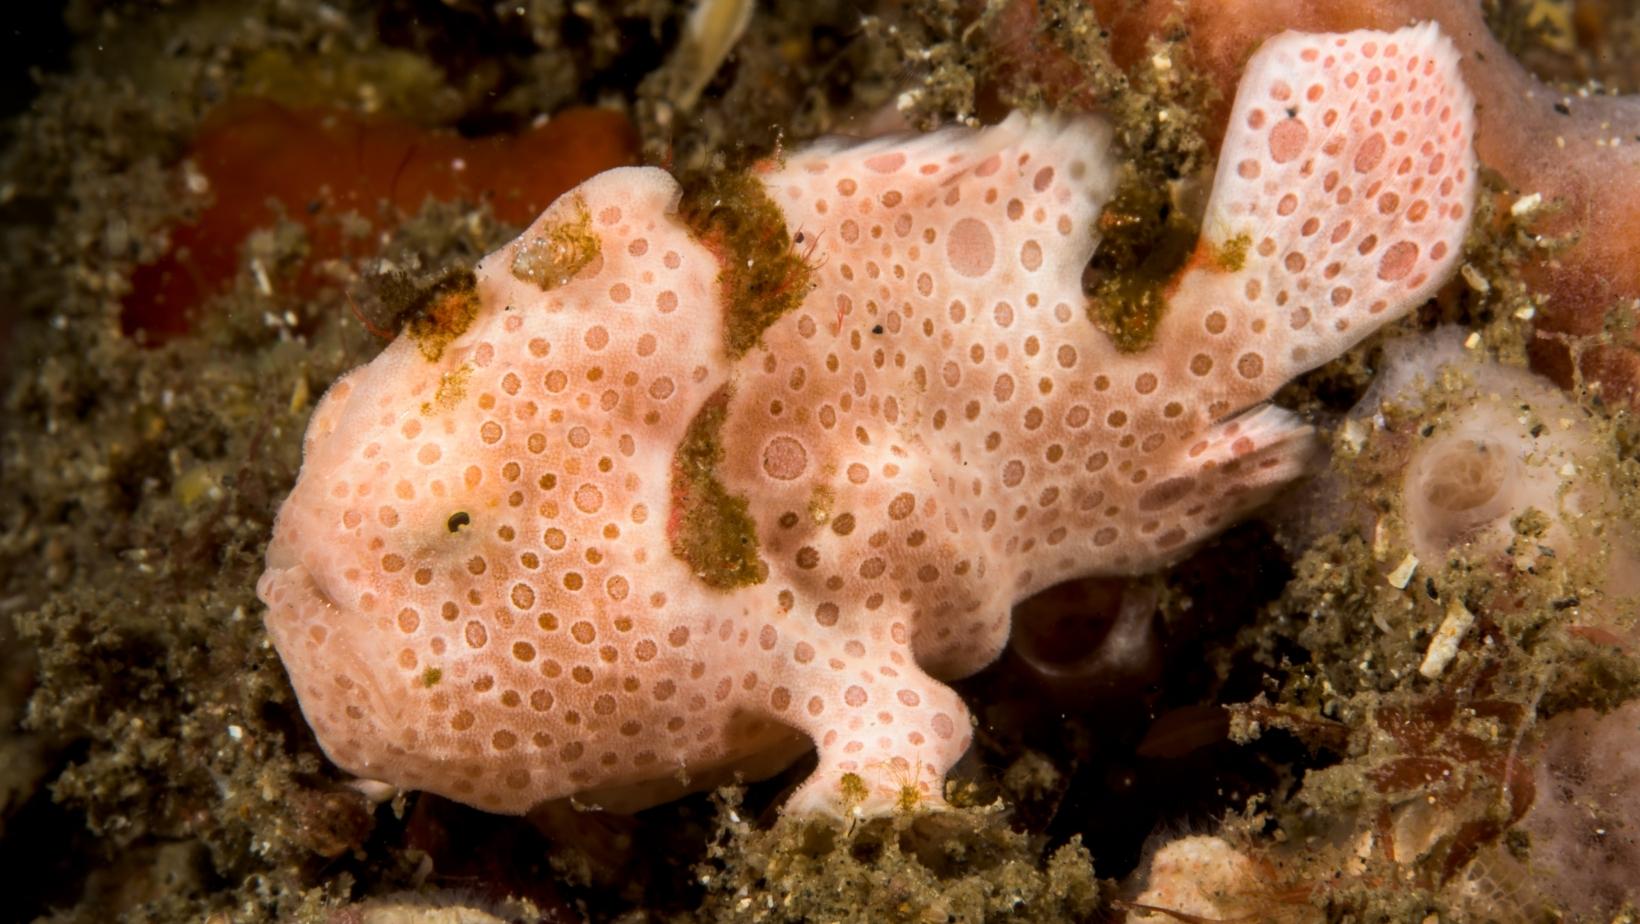 Lovely pink sea animals